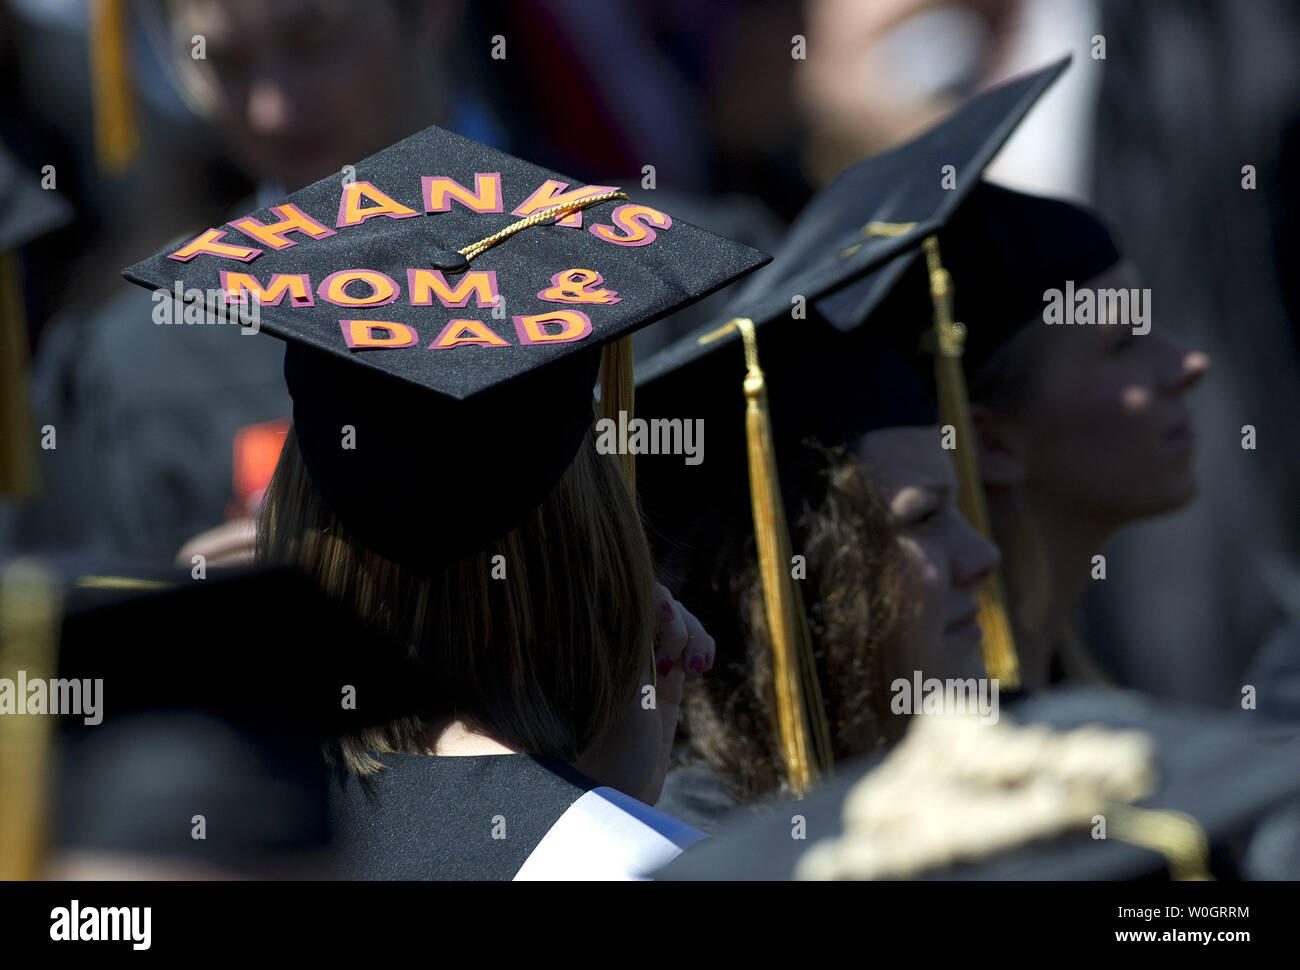 A Decorated Mortar Board Is Seen During The 2012 Virginia